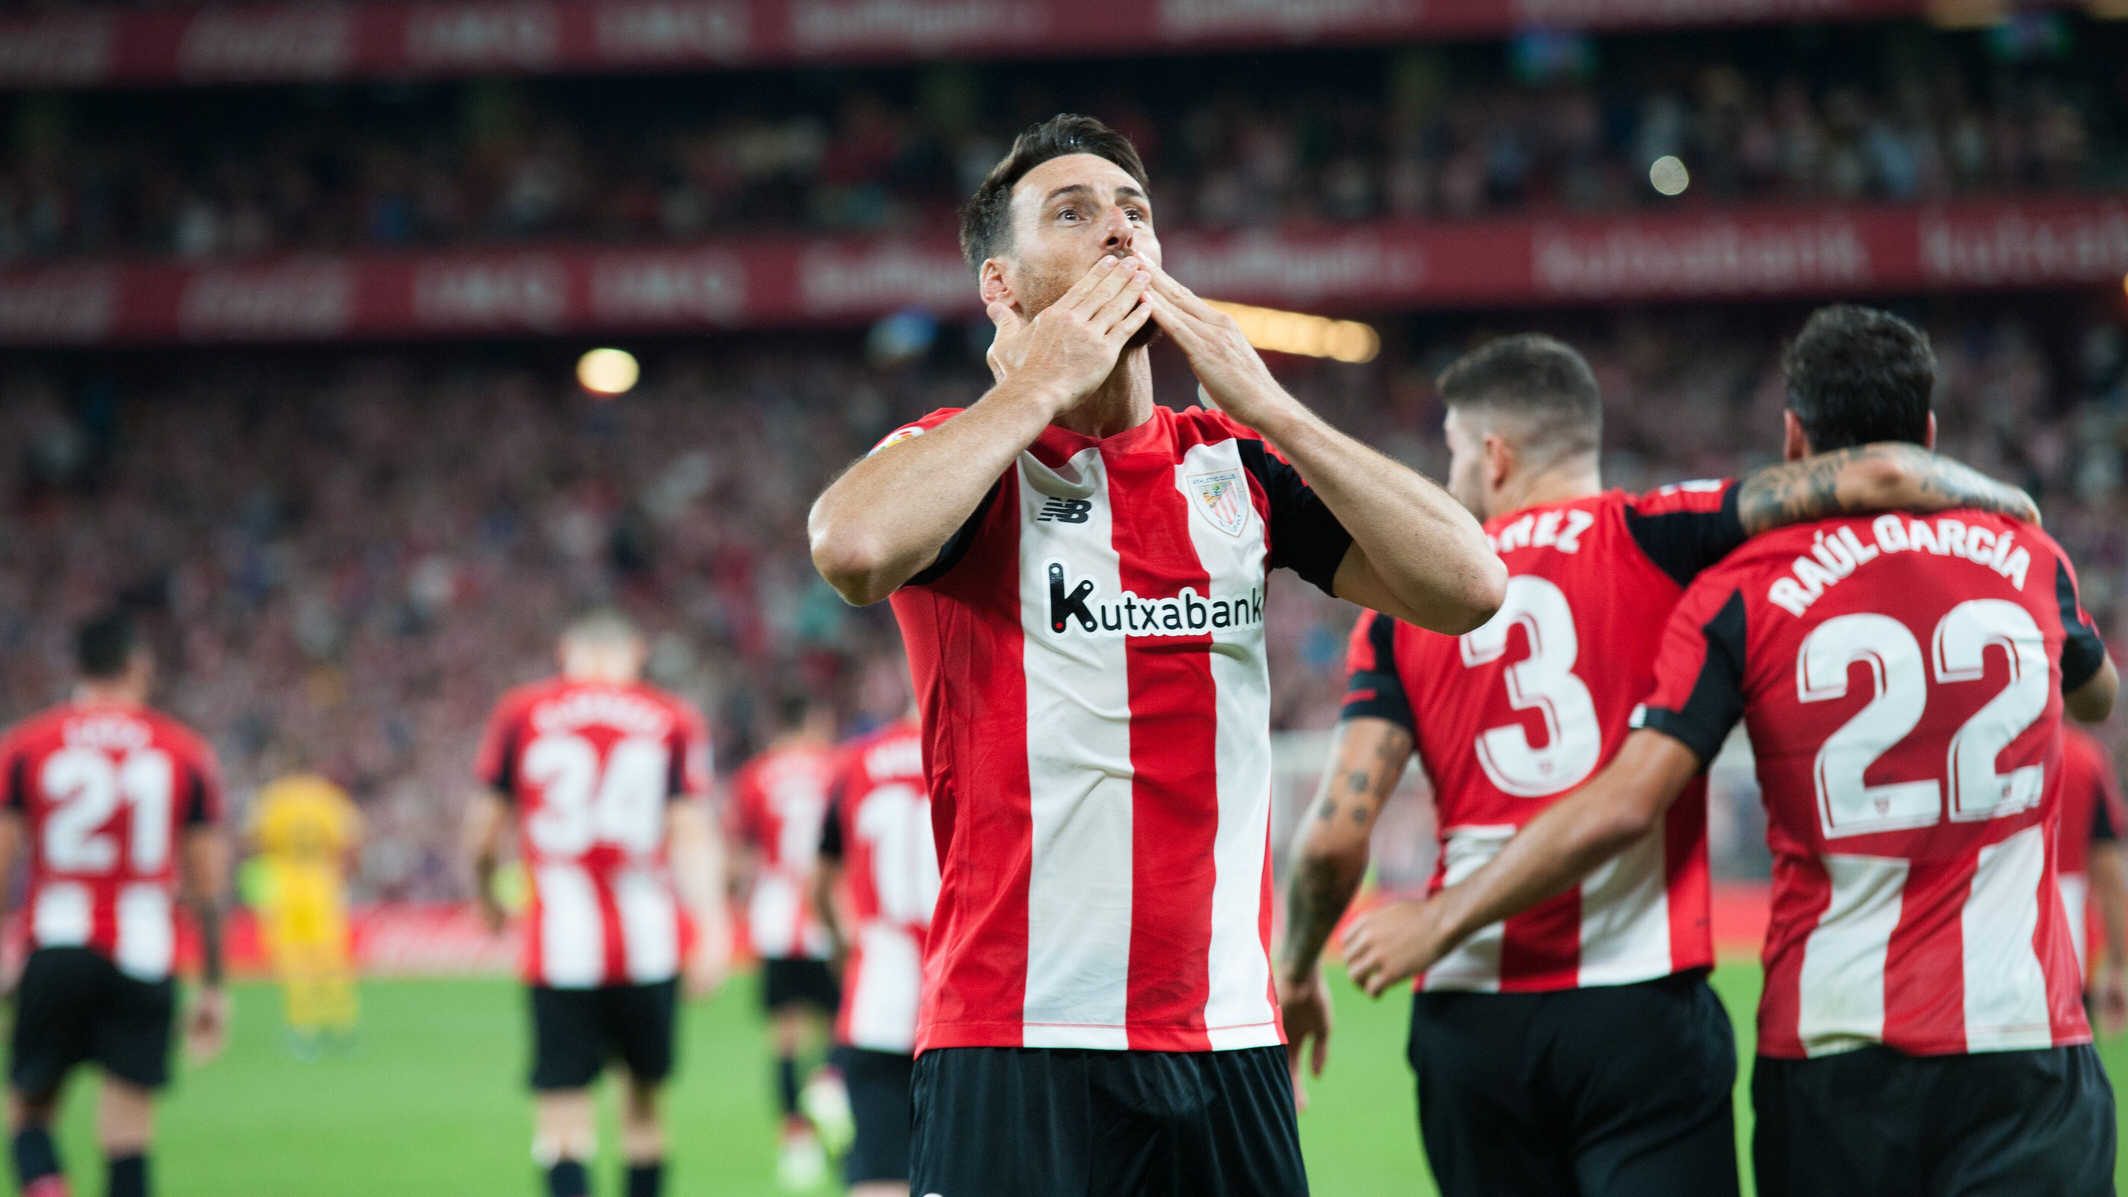 Press conference by Aritz Aduriz. Live streaming.